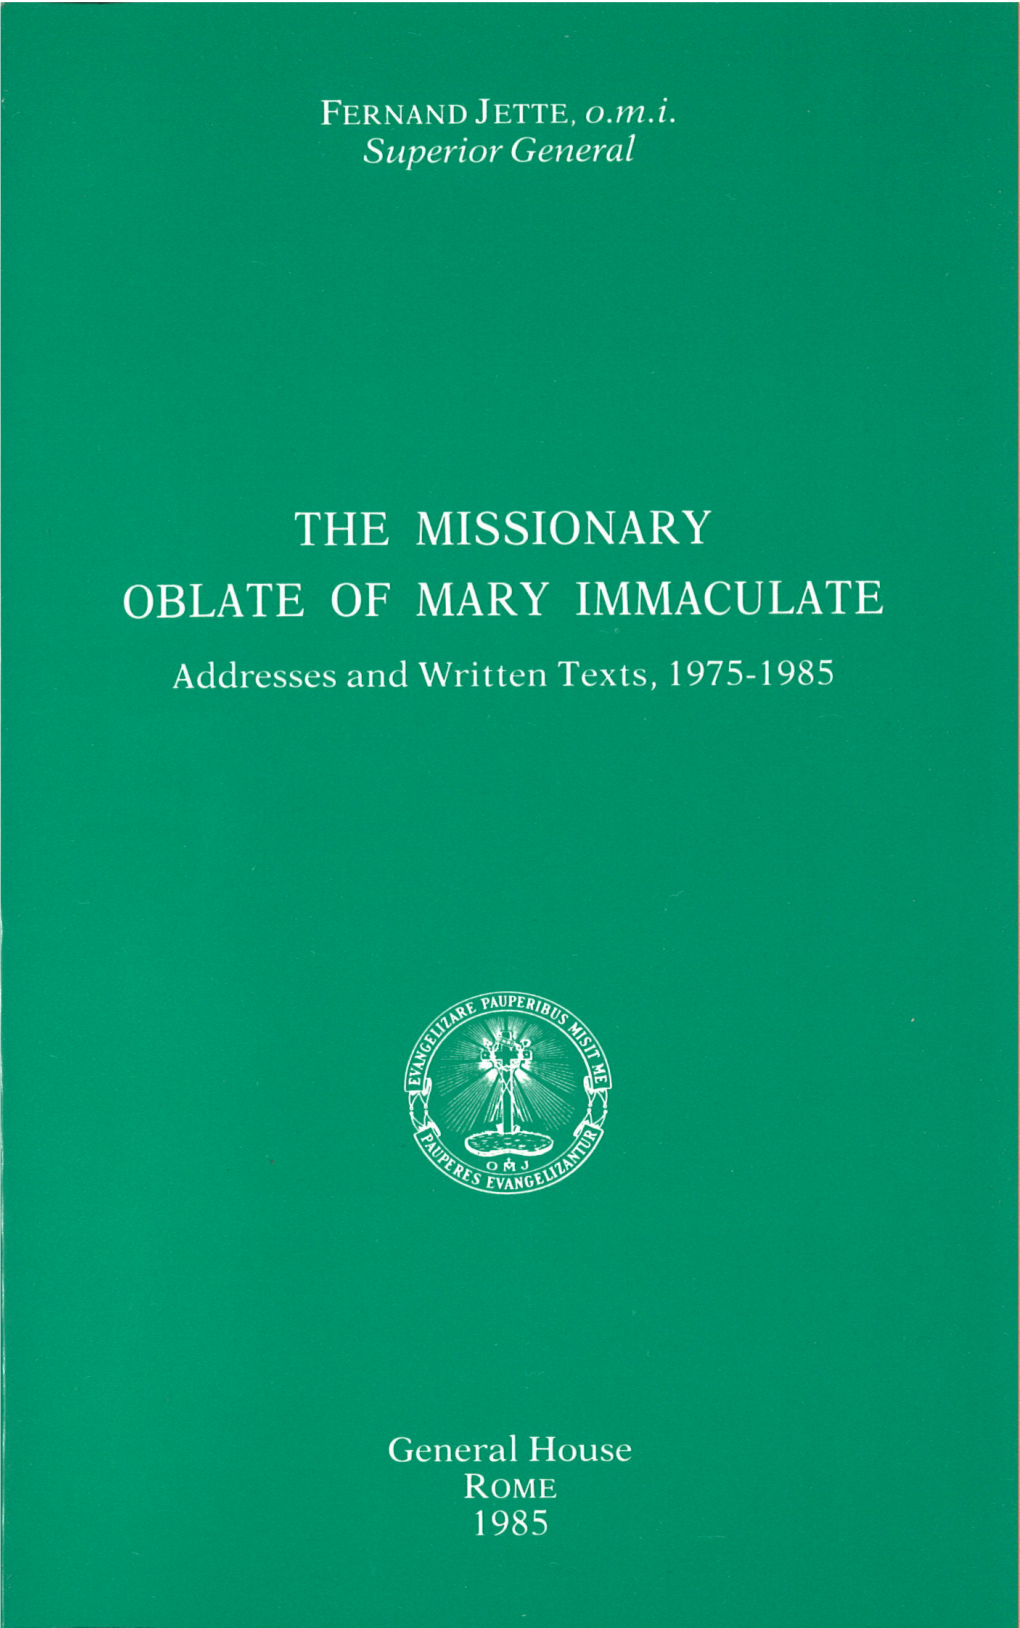 THE MISSIONARY OBLATE of MARY IMMACULATE Addresses and Written Texts, 1975-1985